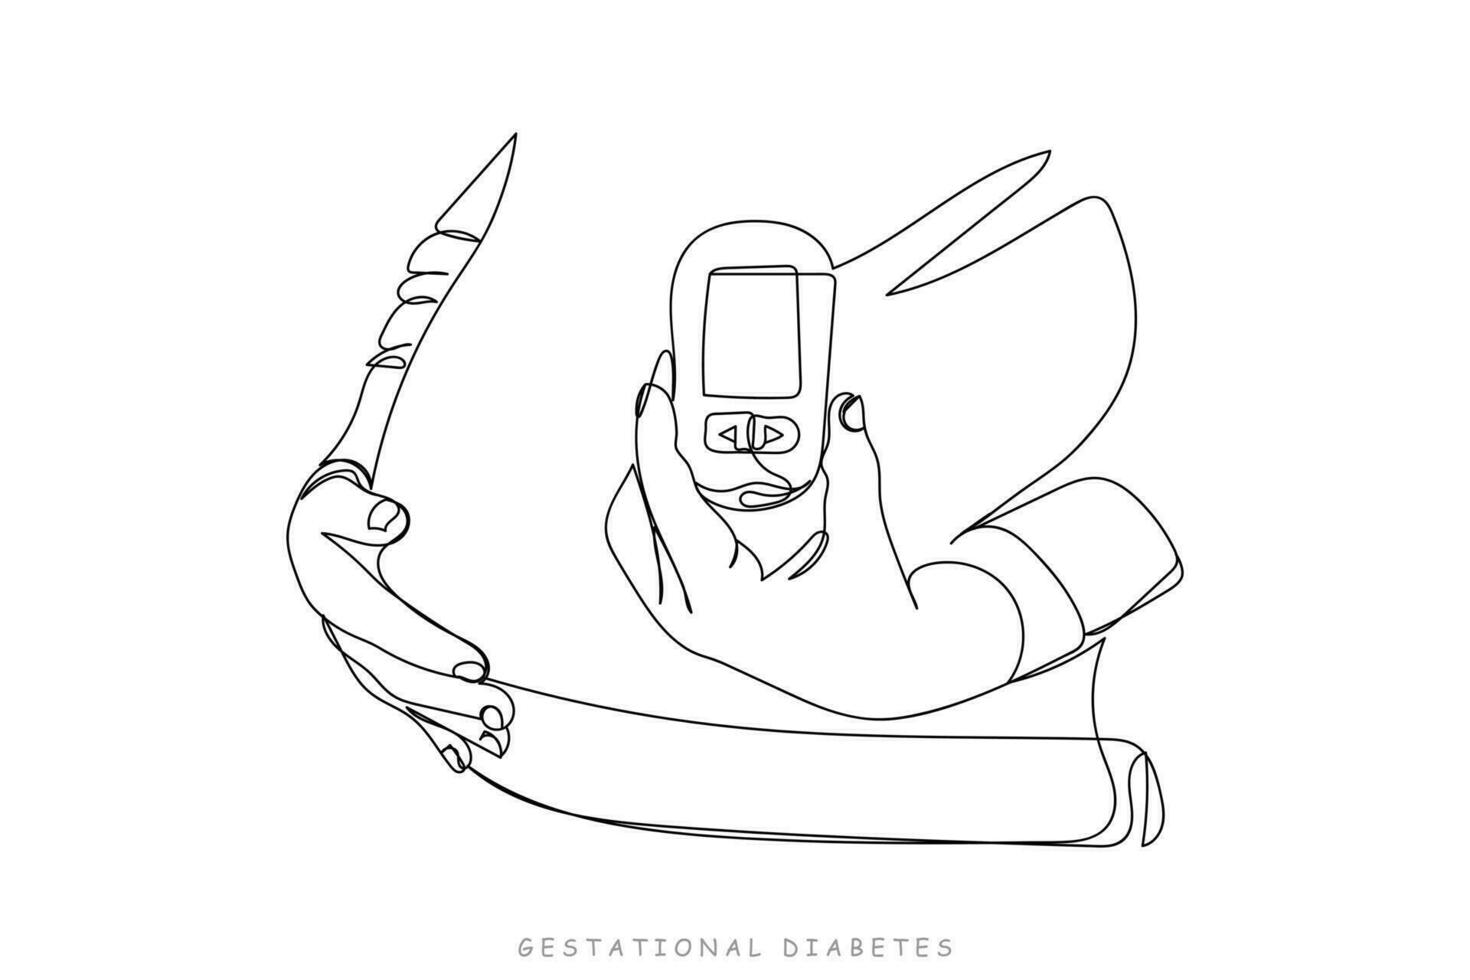 World diabetes day in November. Glucometer and lancet line art. vector